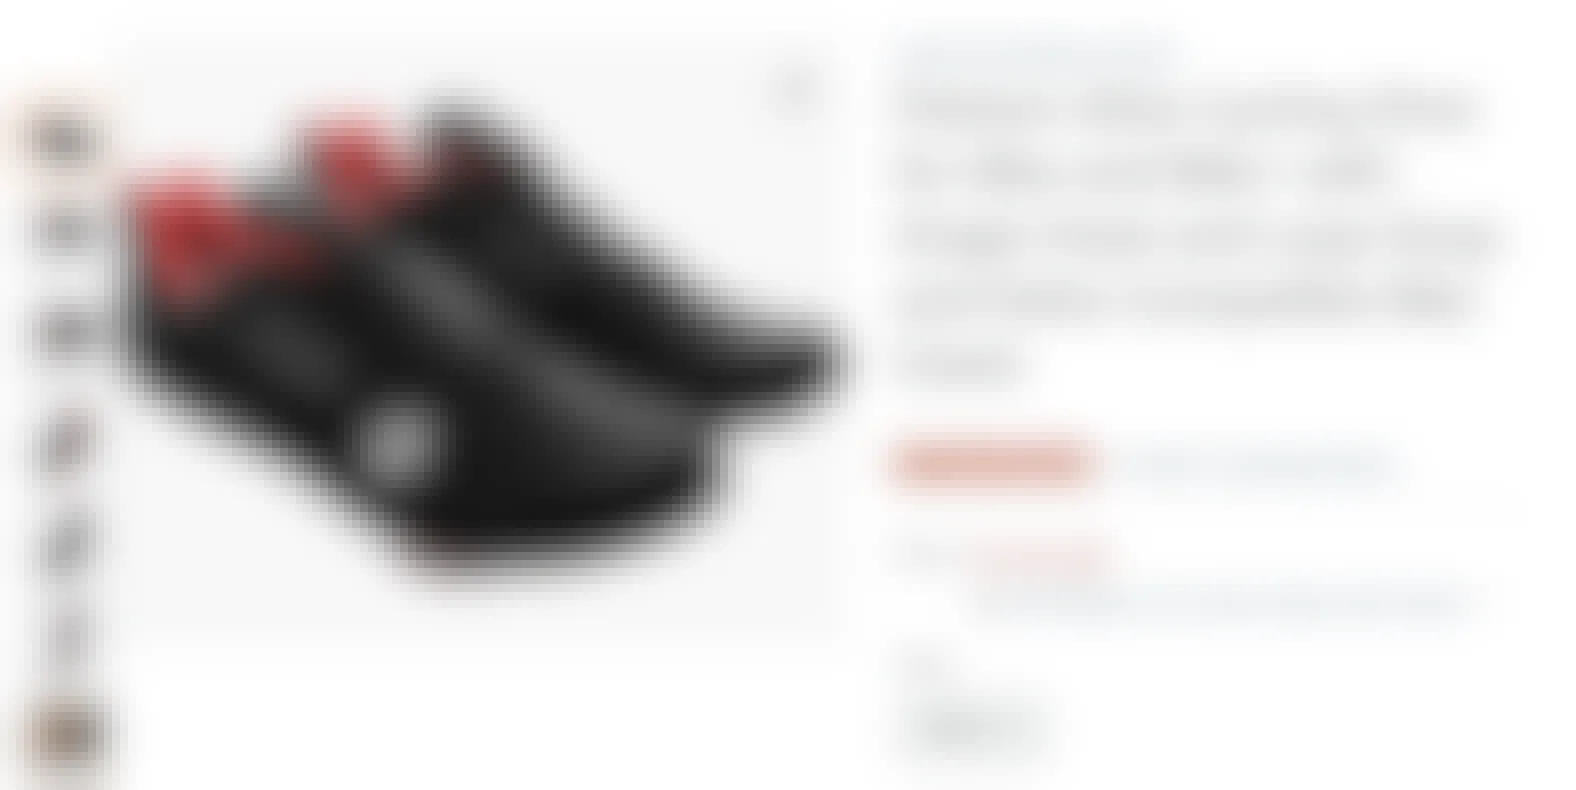 A screenshot of the Peloton cycle shoes product page on Amazon